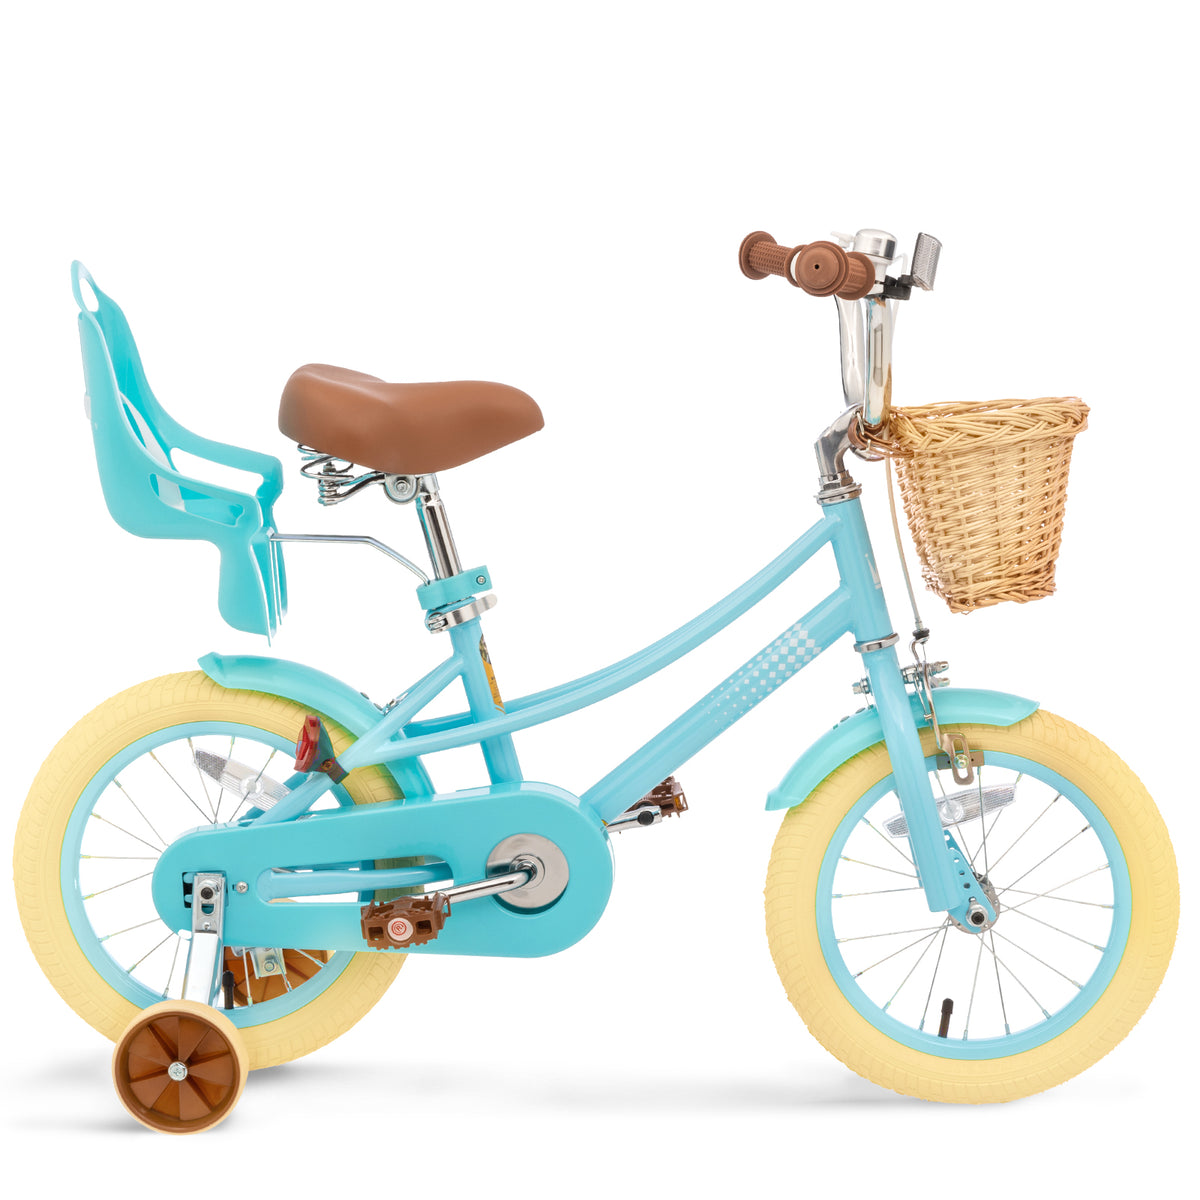 XJD Kids Bicycle for Toddlers and Children 2-12 Years Old, 12 14 16 20 inch Bike for Girls and Boys, with Basket and Bell Training Wheels, Adjustable Seat Handlebar Height, Blue